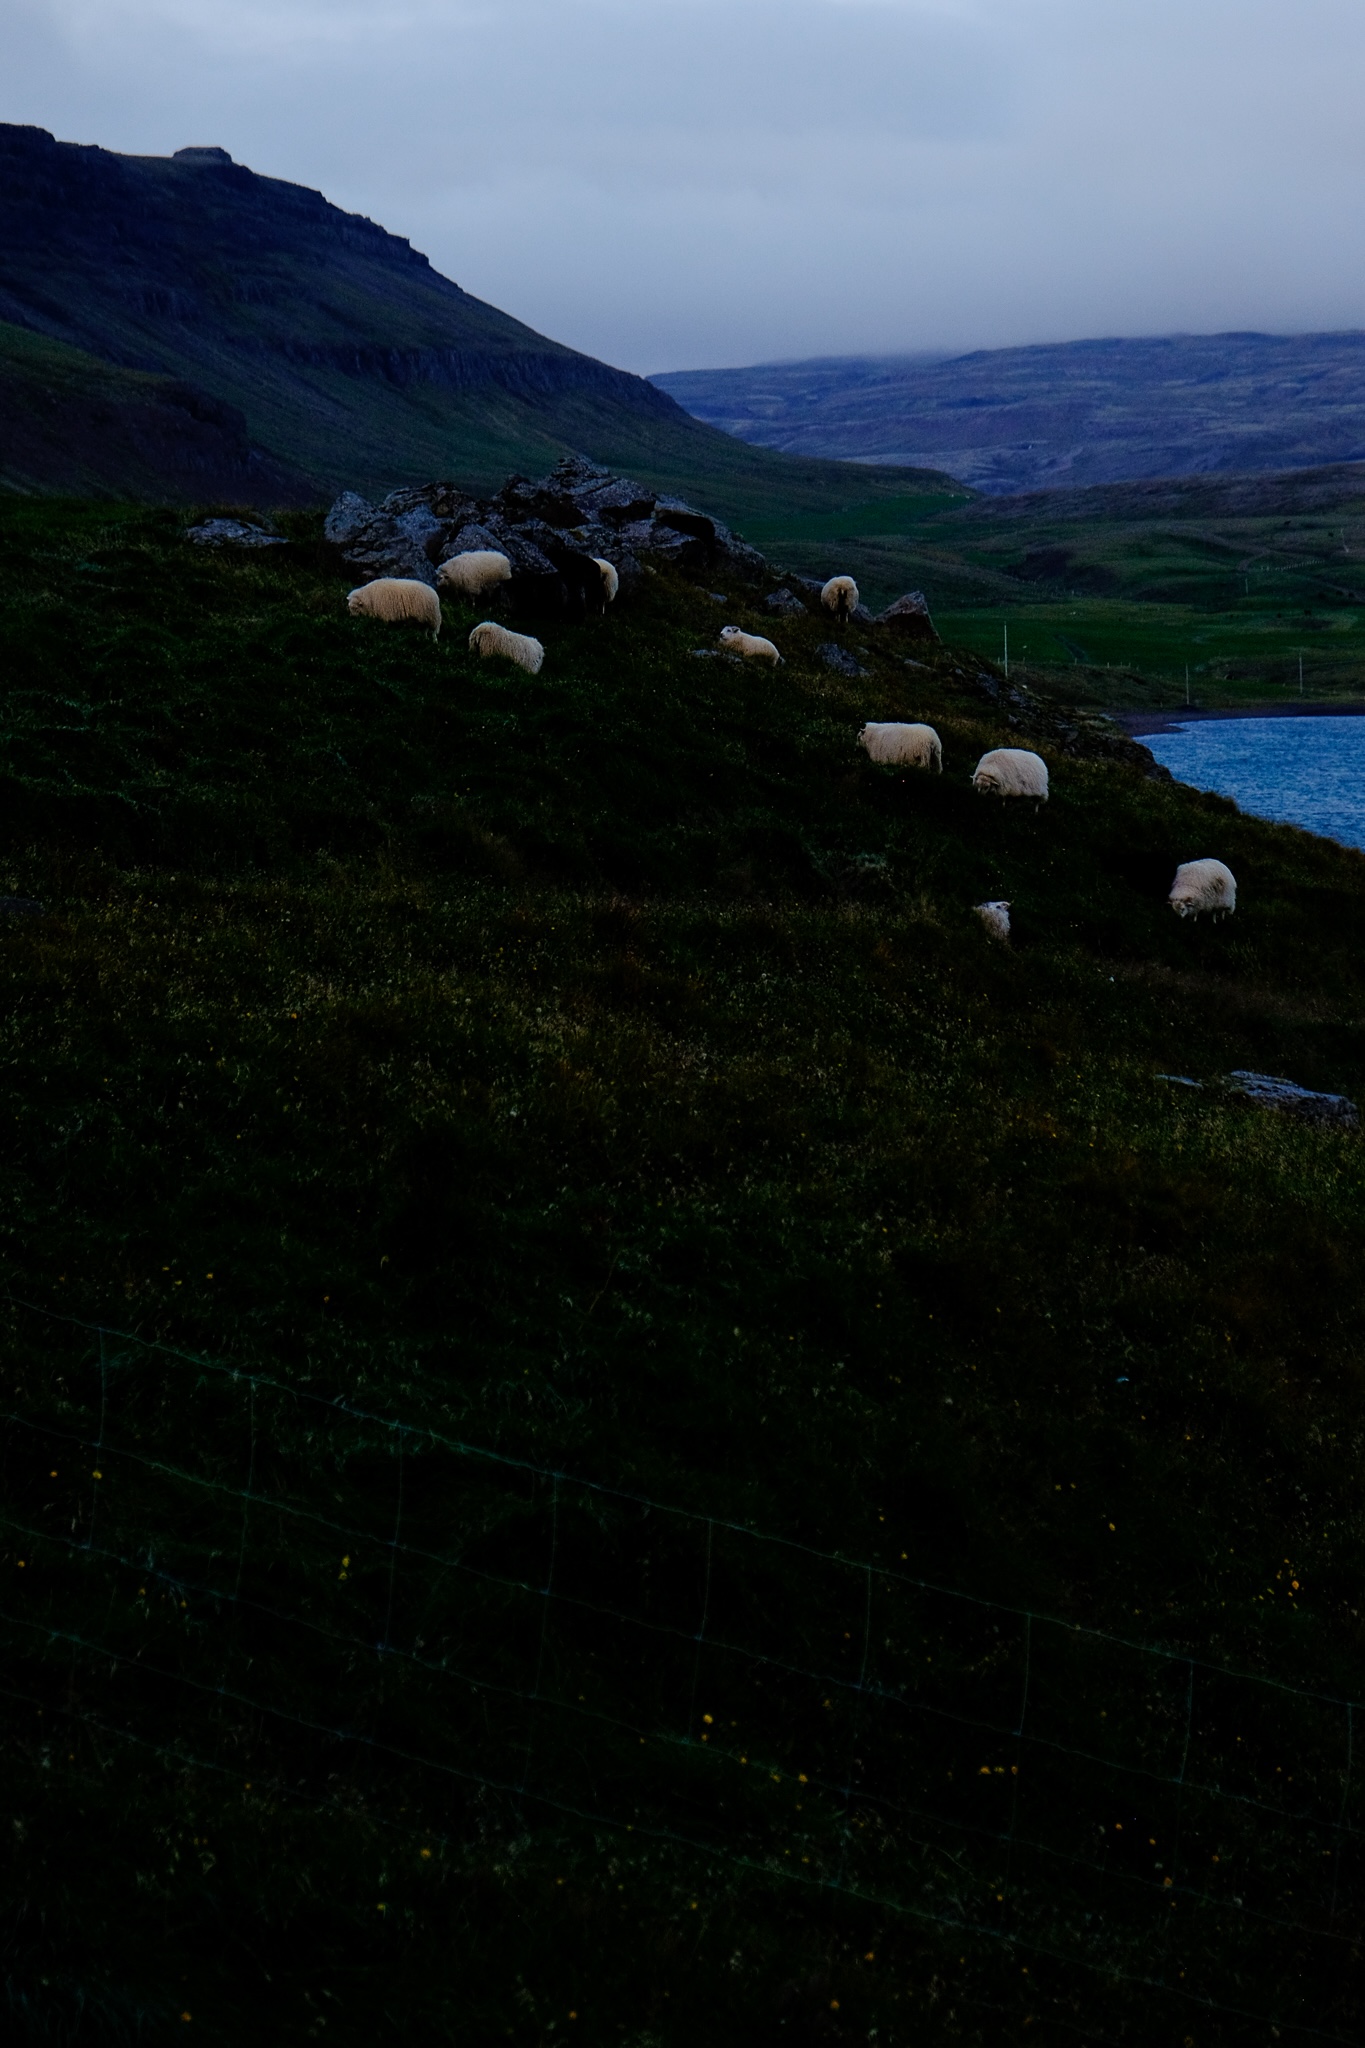 Sheep in a grassy hill on a farm in the late evening